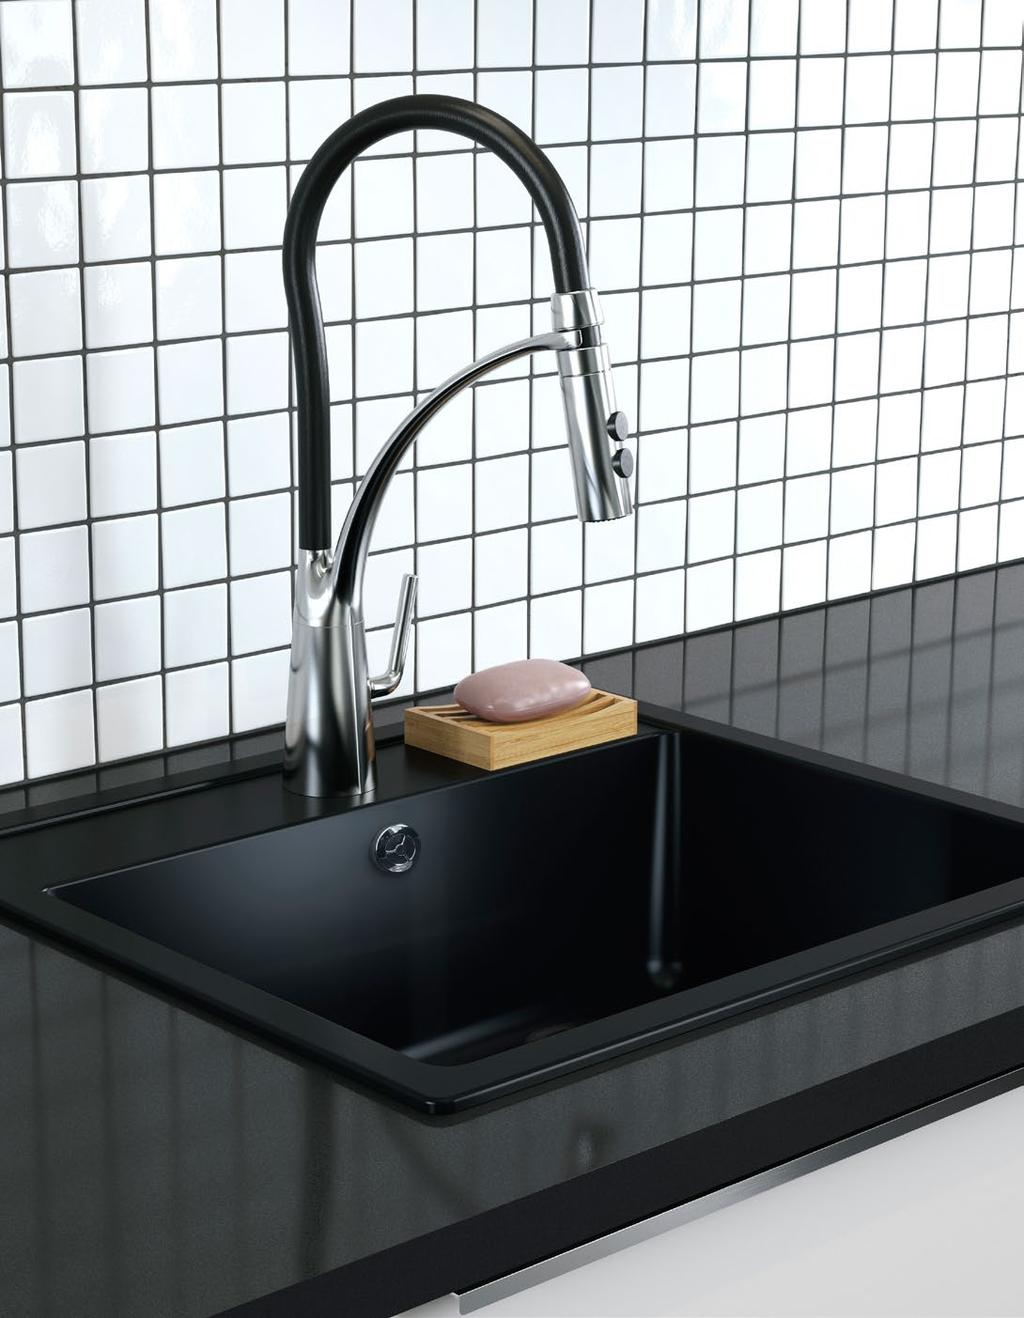 That's why all of our sinks come with a 25-year guarantee. All sinks except our FYNDIG are included in our 25-year guarantee.